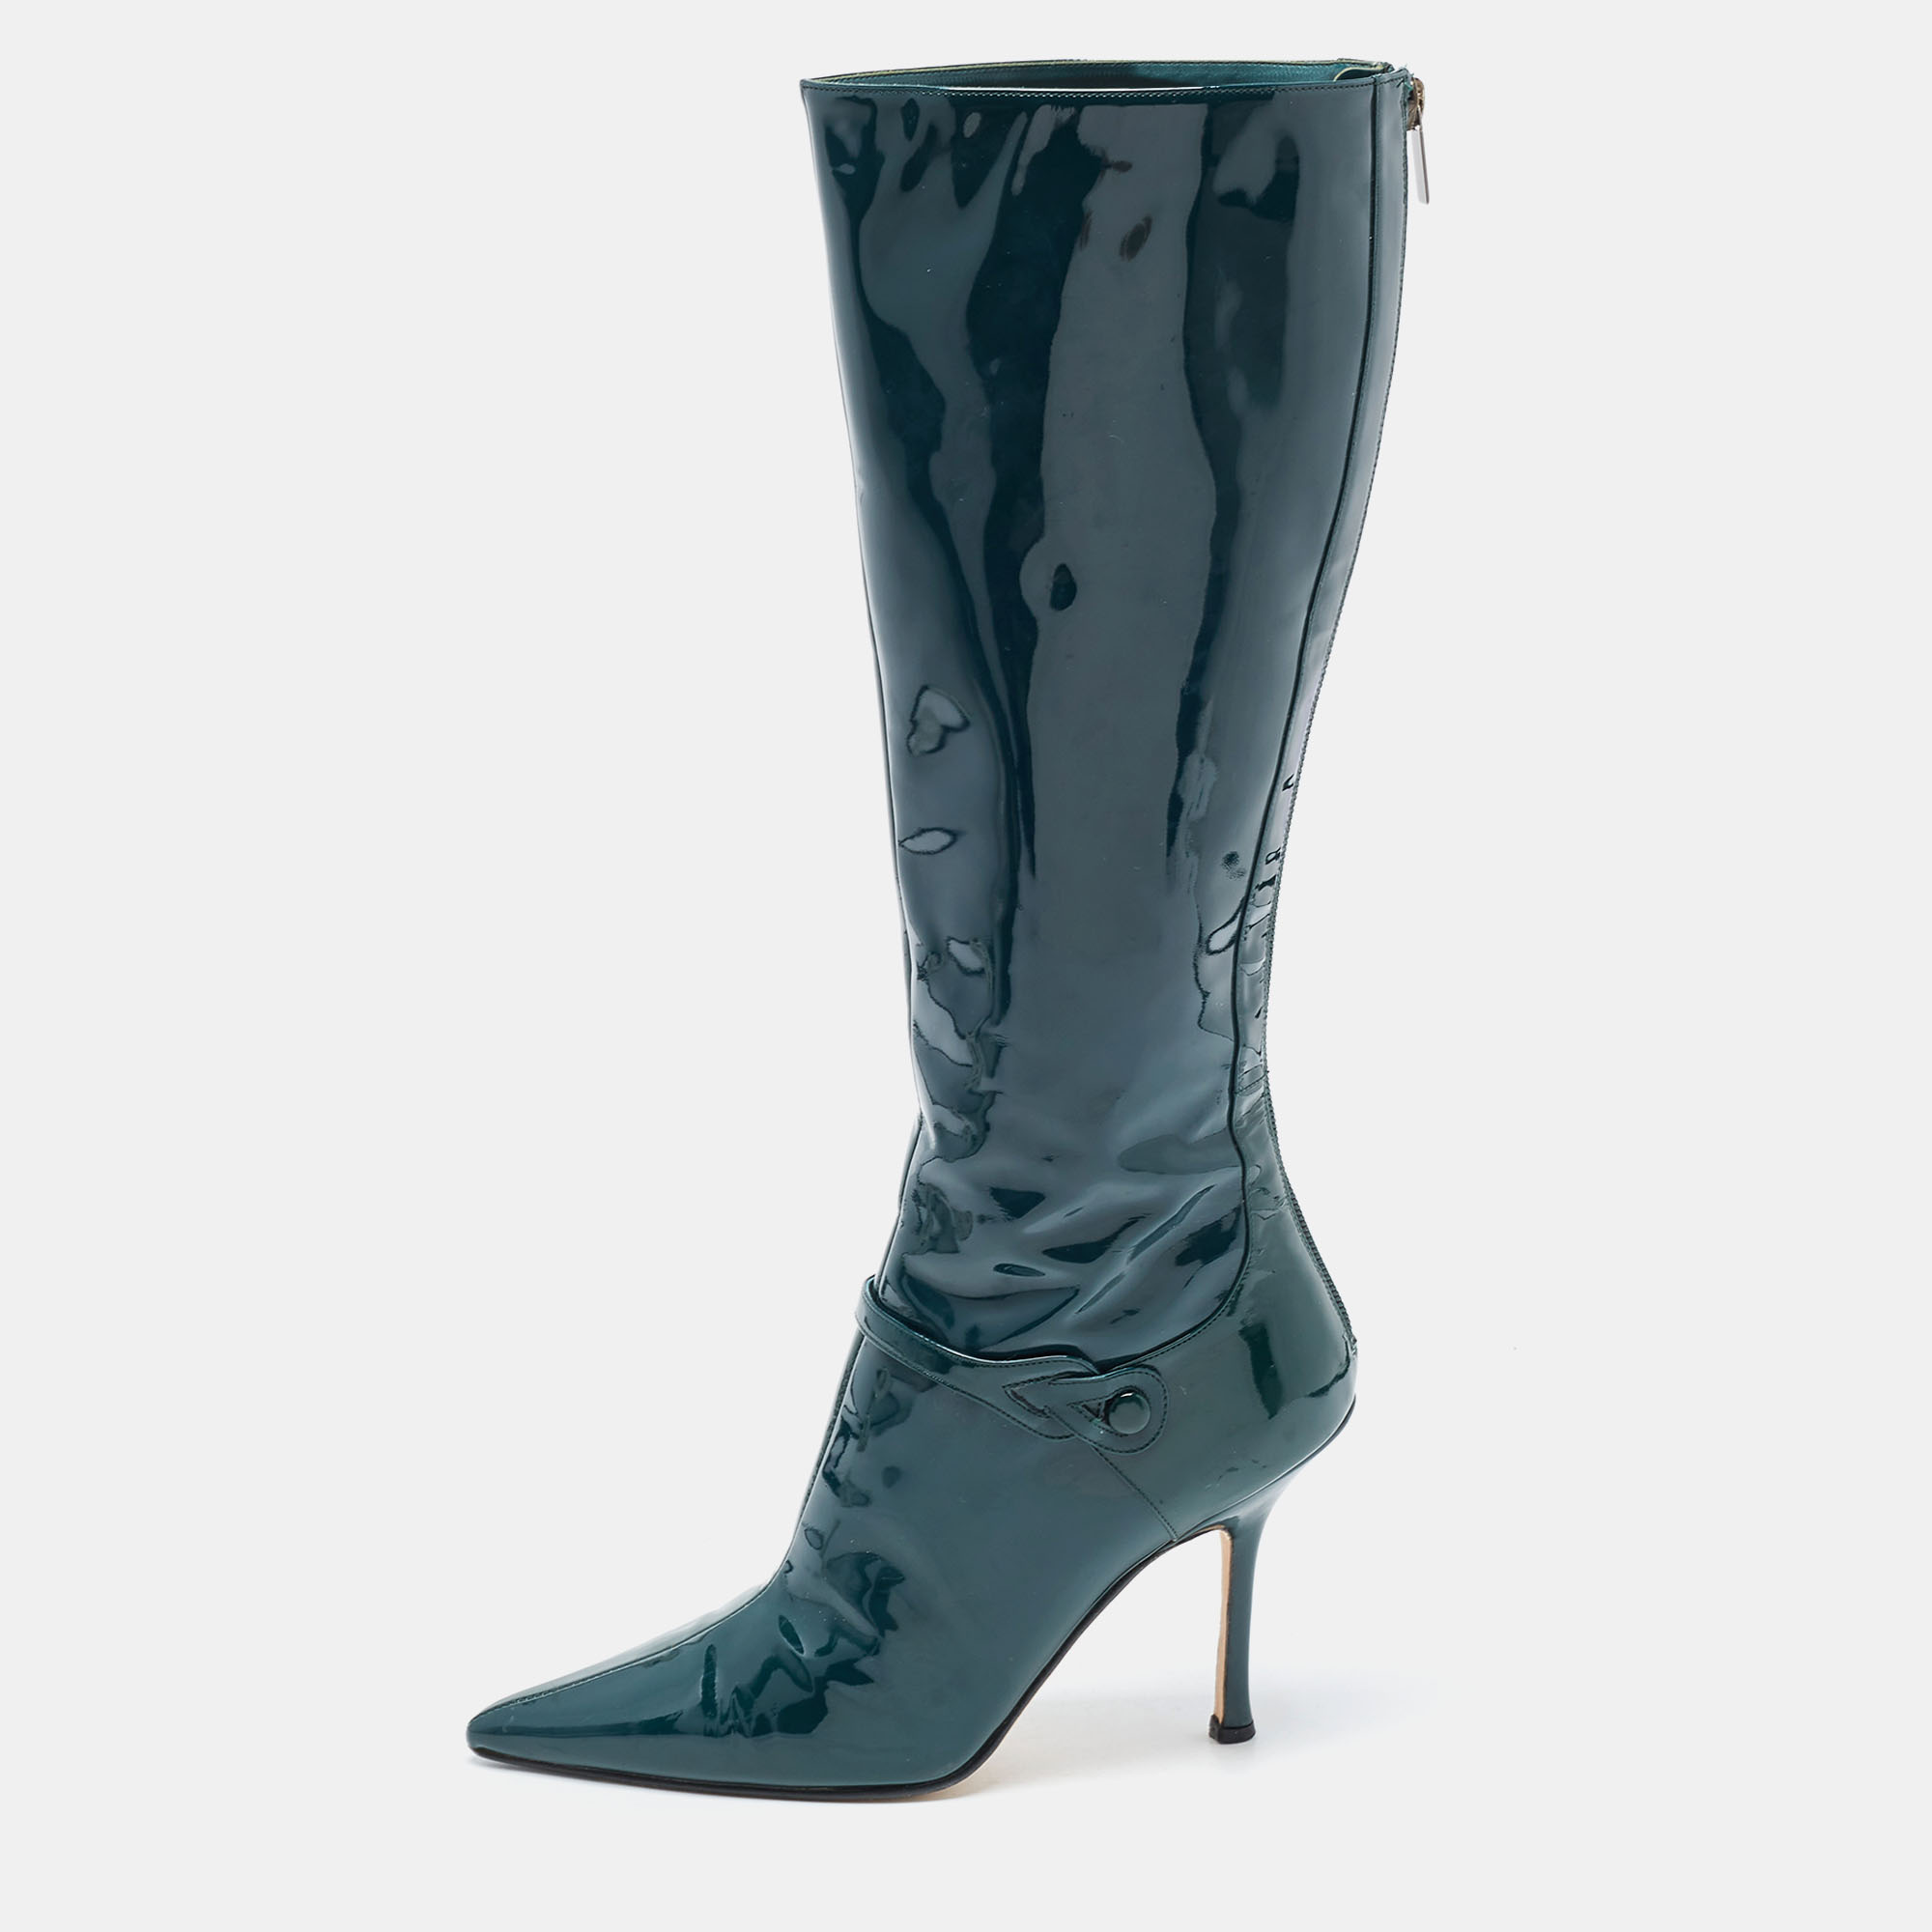 Jimmy Choo Green Patent Leather Calf Length Boots Size 37.5